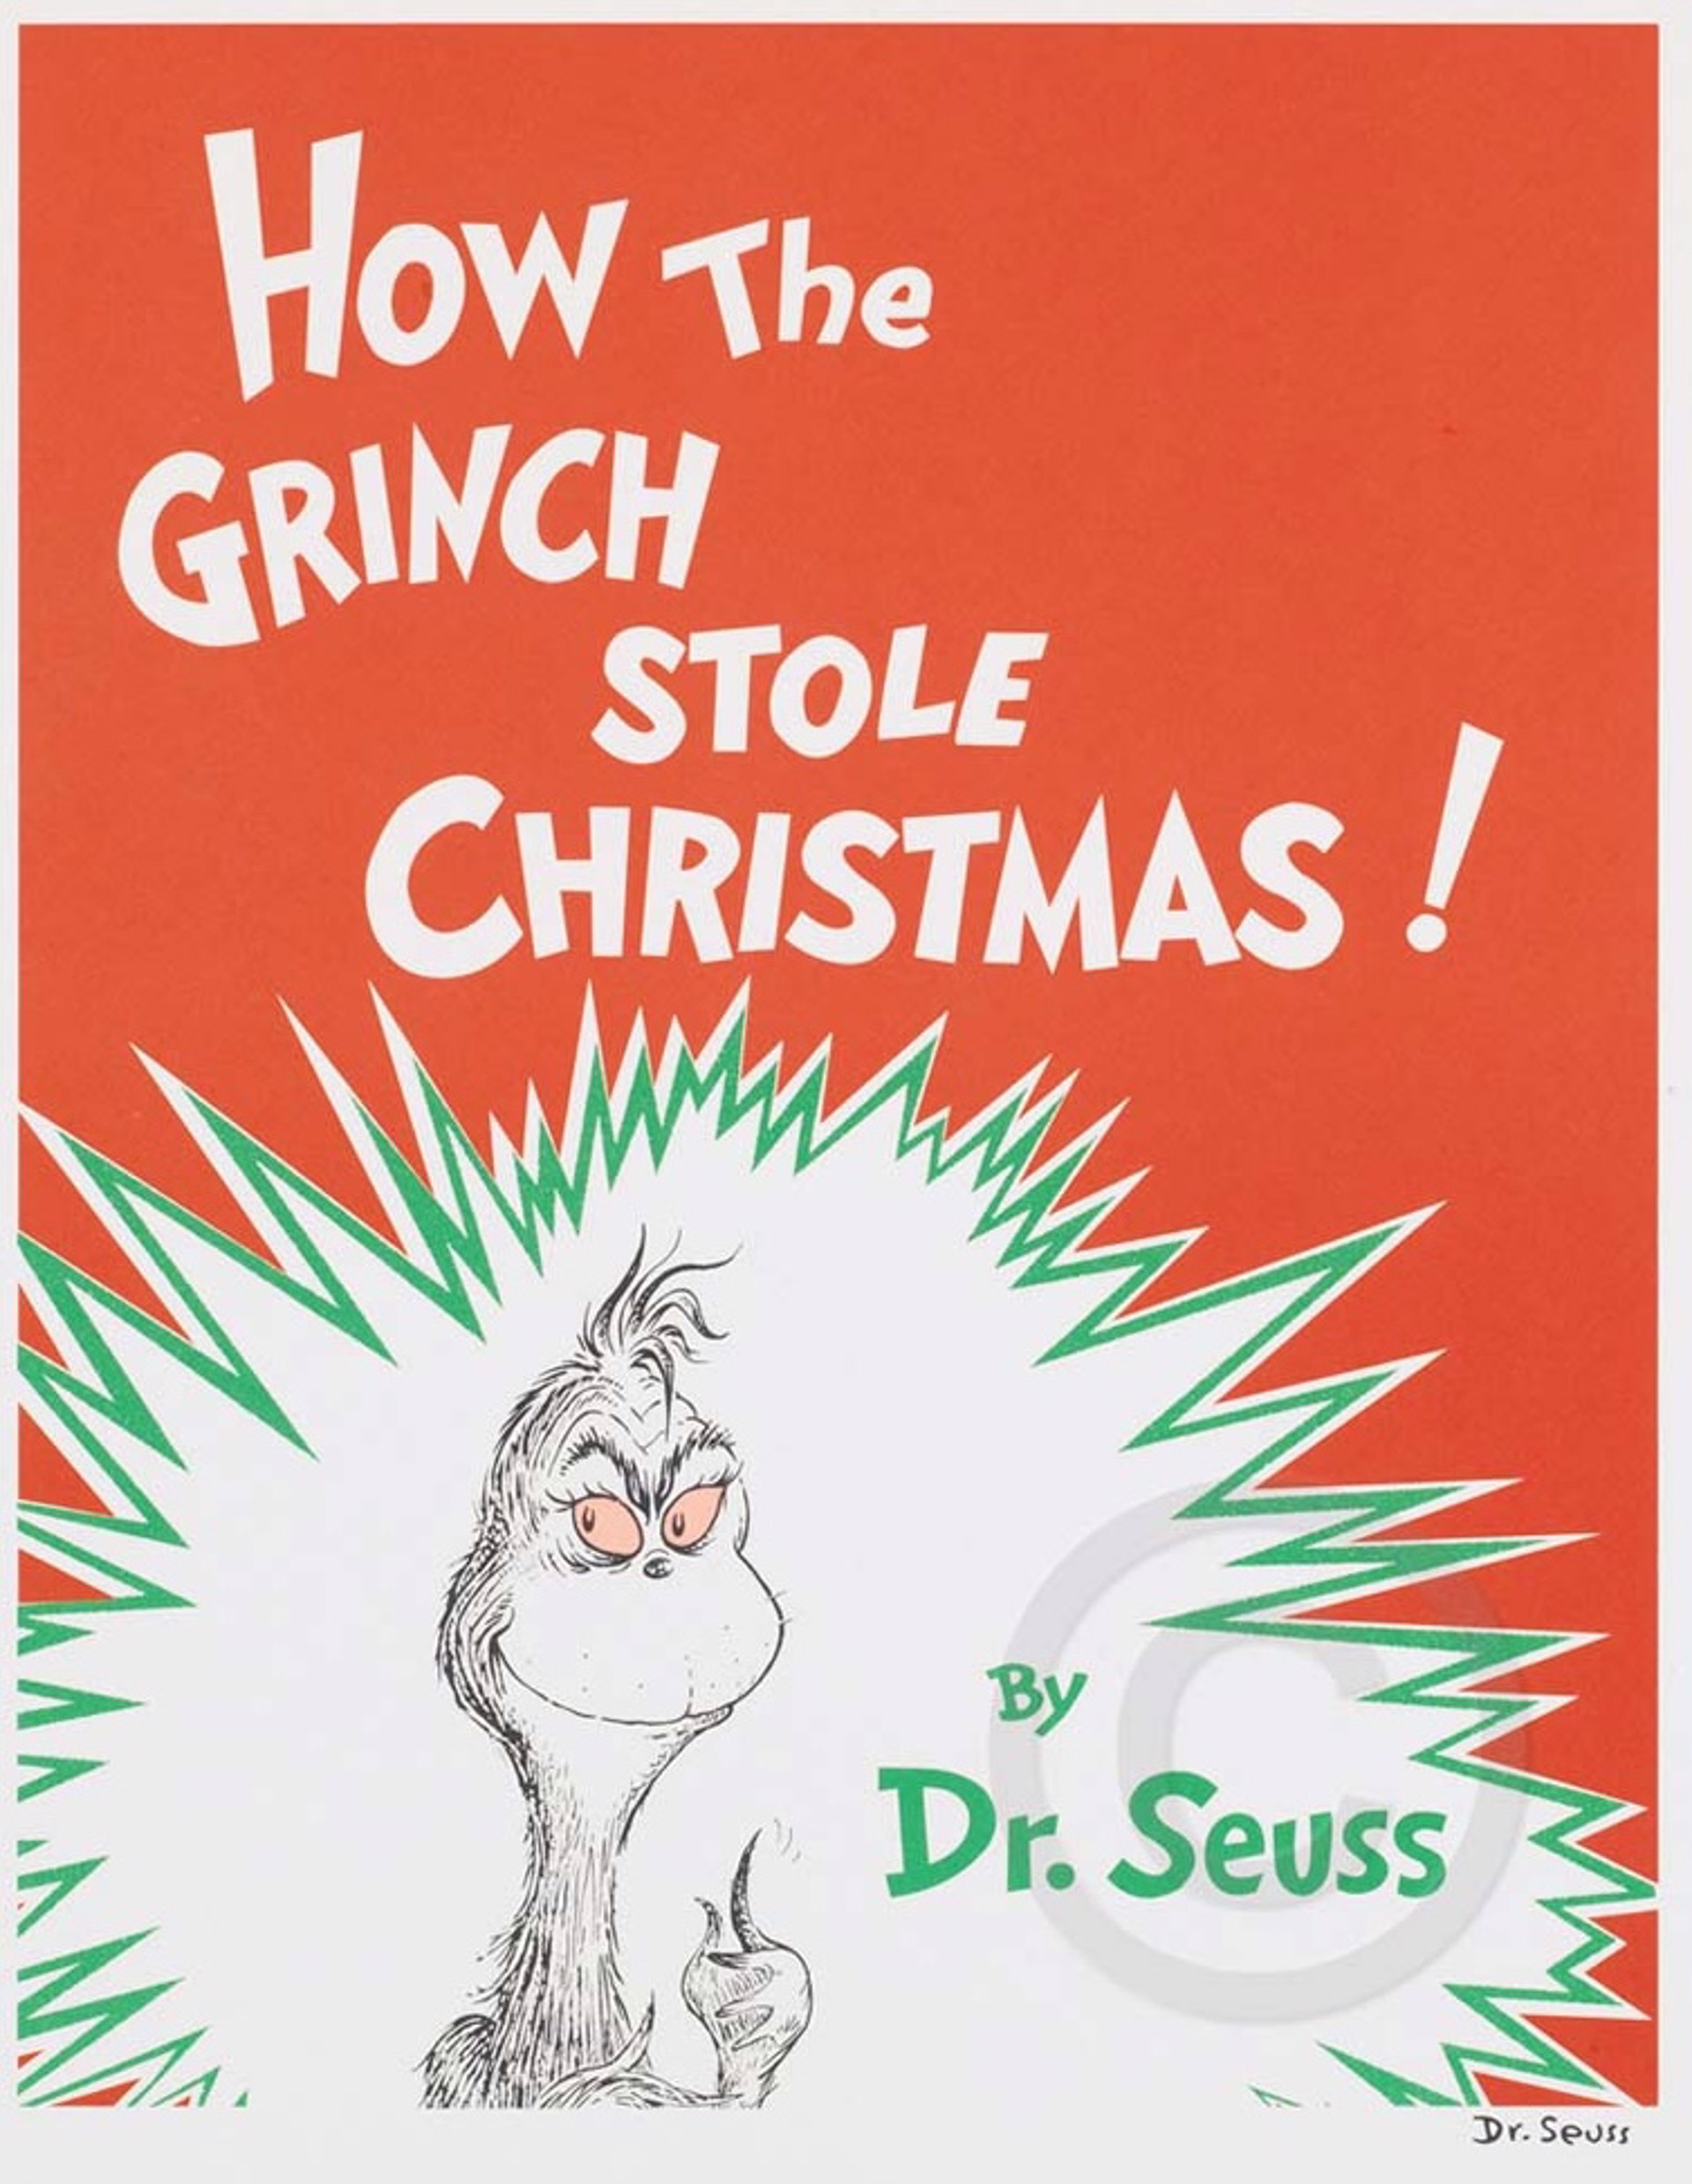 How The Grinch Stole Christmas - (Book Cover) by Dr. Seuss